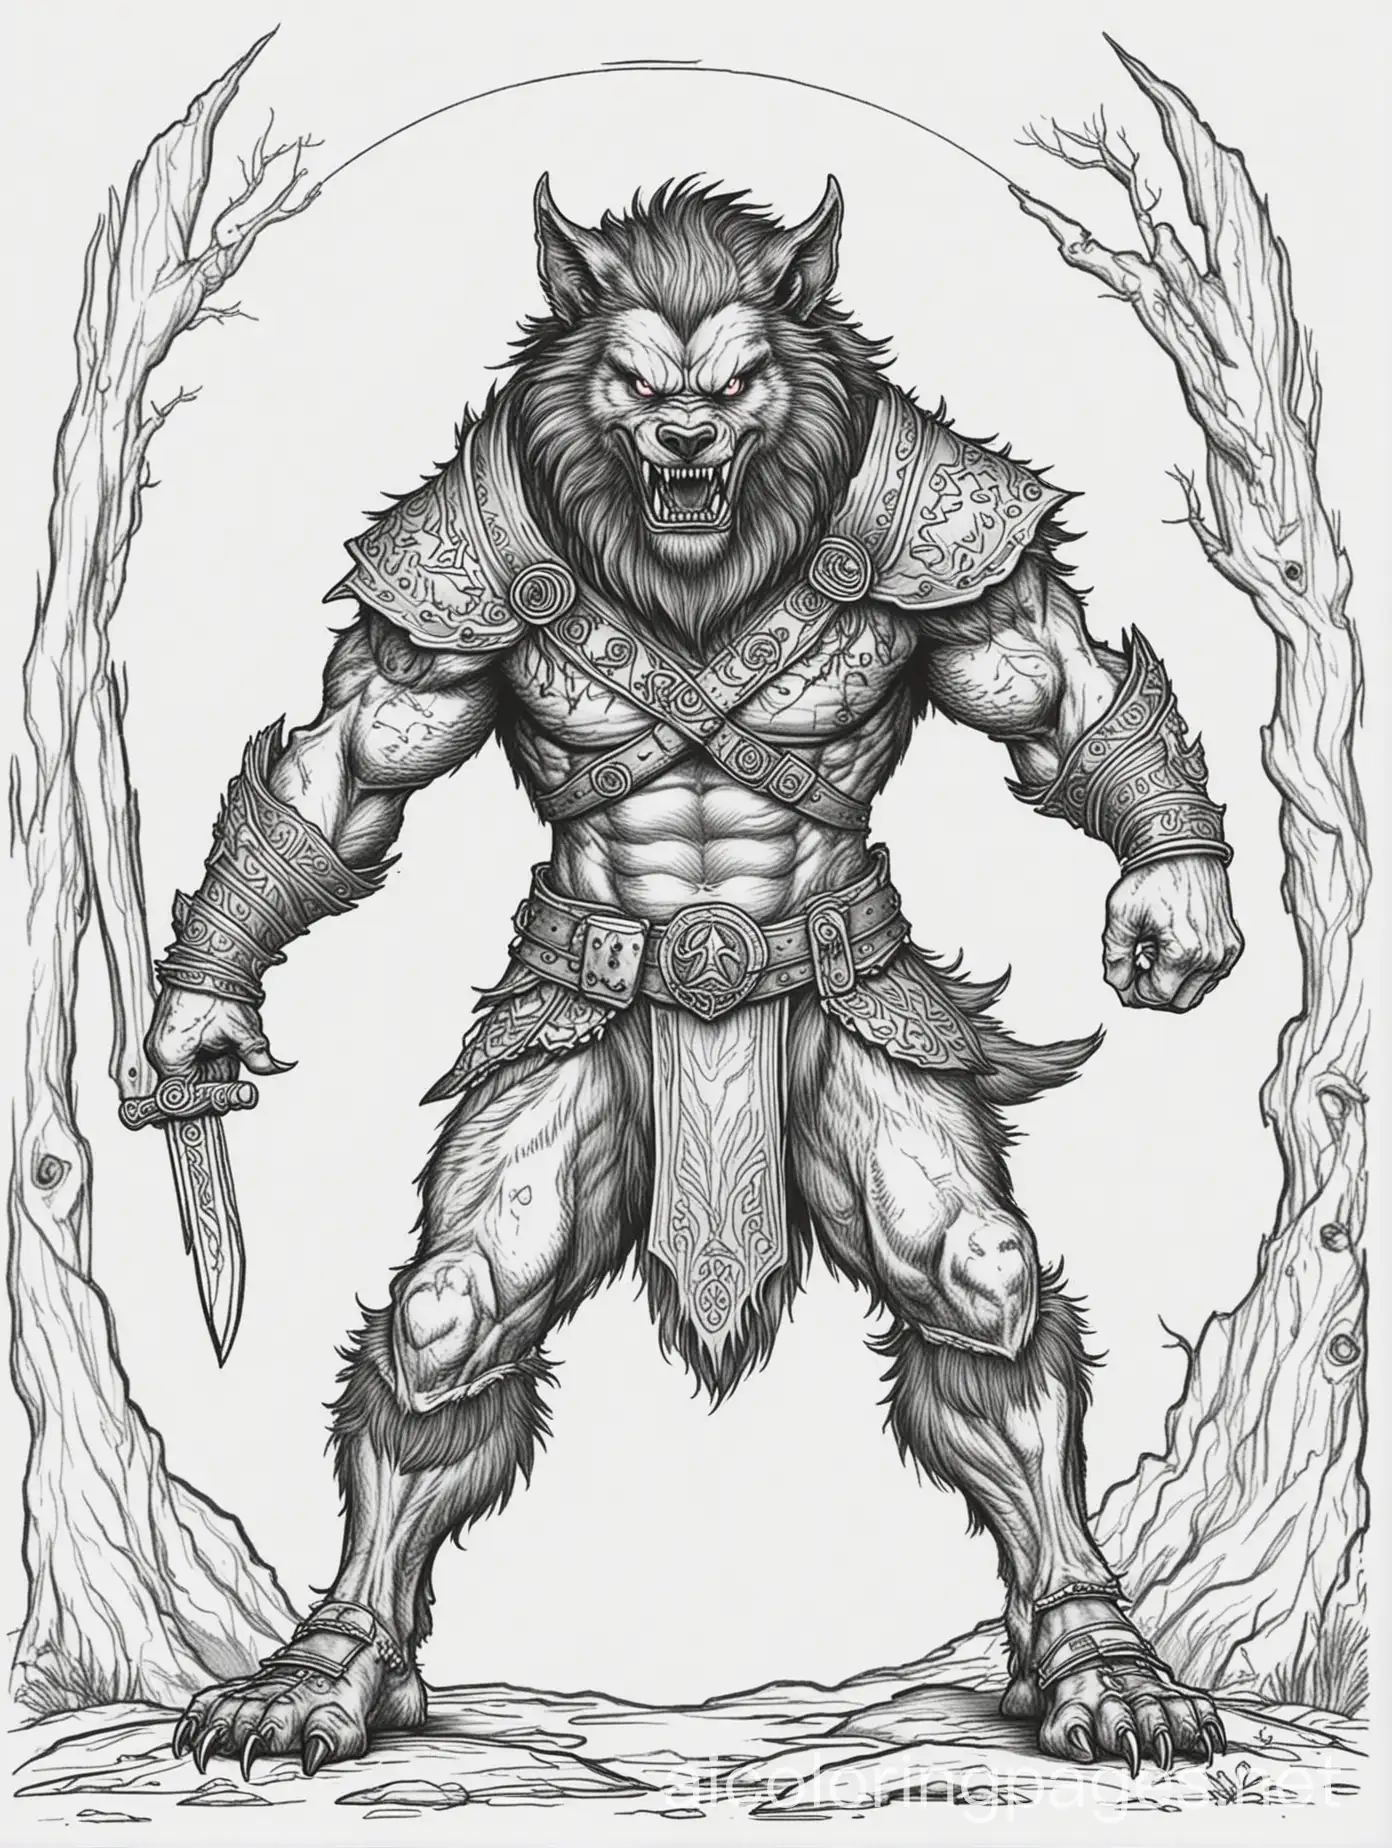 werewolf warriors, Coloring Page, black and white, line art, white background, Simplicity, Ample White Space. The background of the coloring page is plain white to make it easy for young children to color within the lines. The outlines of all the subjects are easy to distinguish, making it simple for kids to color without too much difficulty